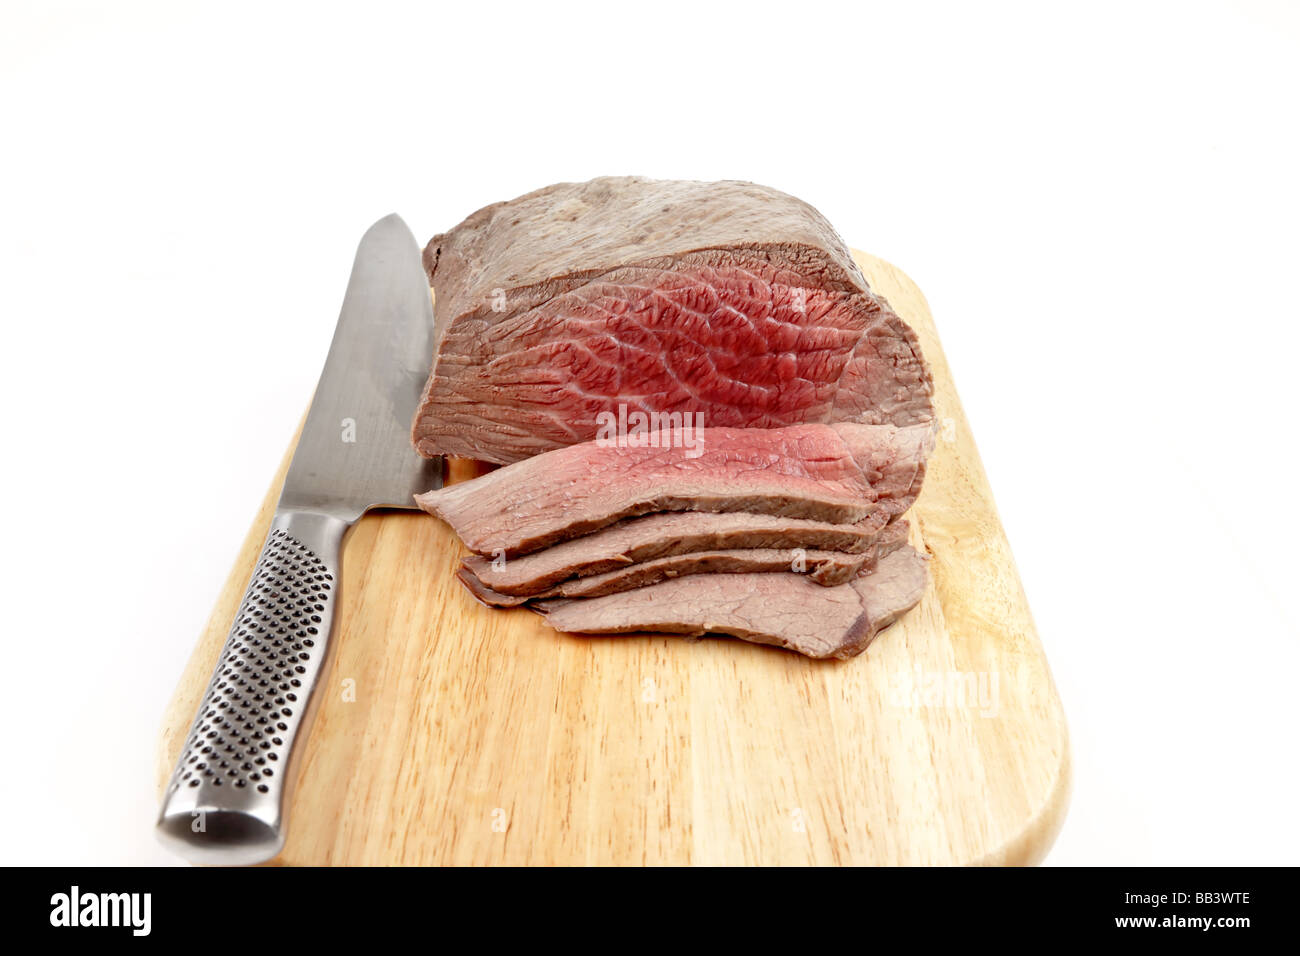 Medium rare Roast of beef sliced and ready for serving Stock Photo